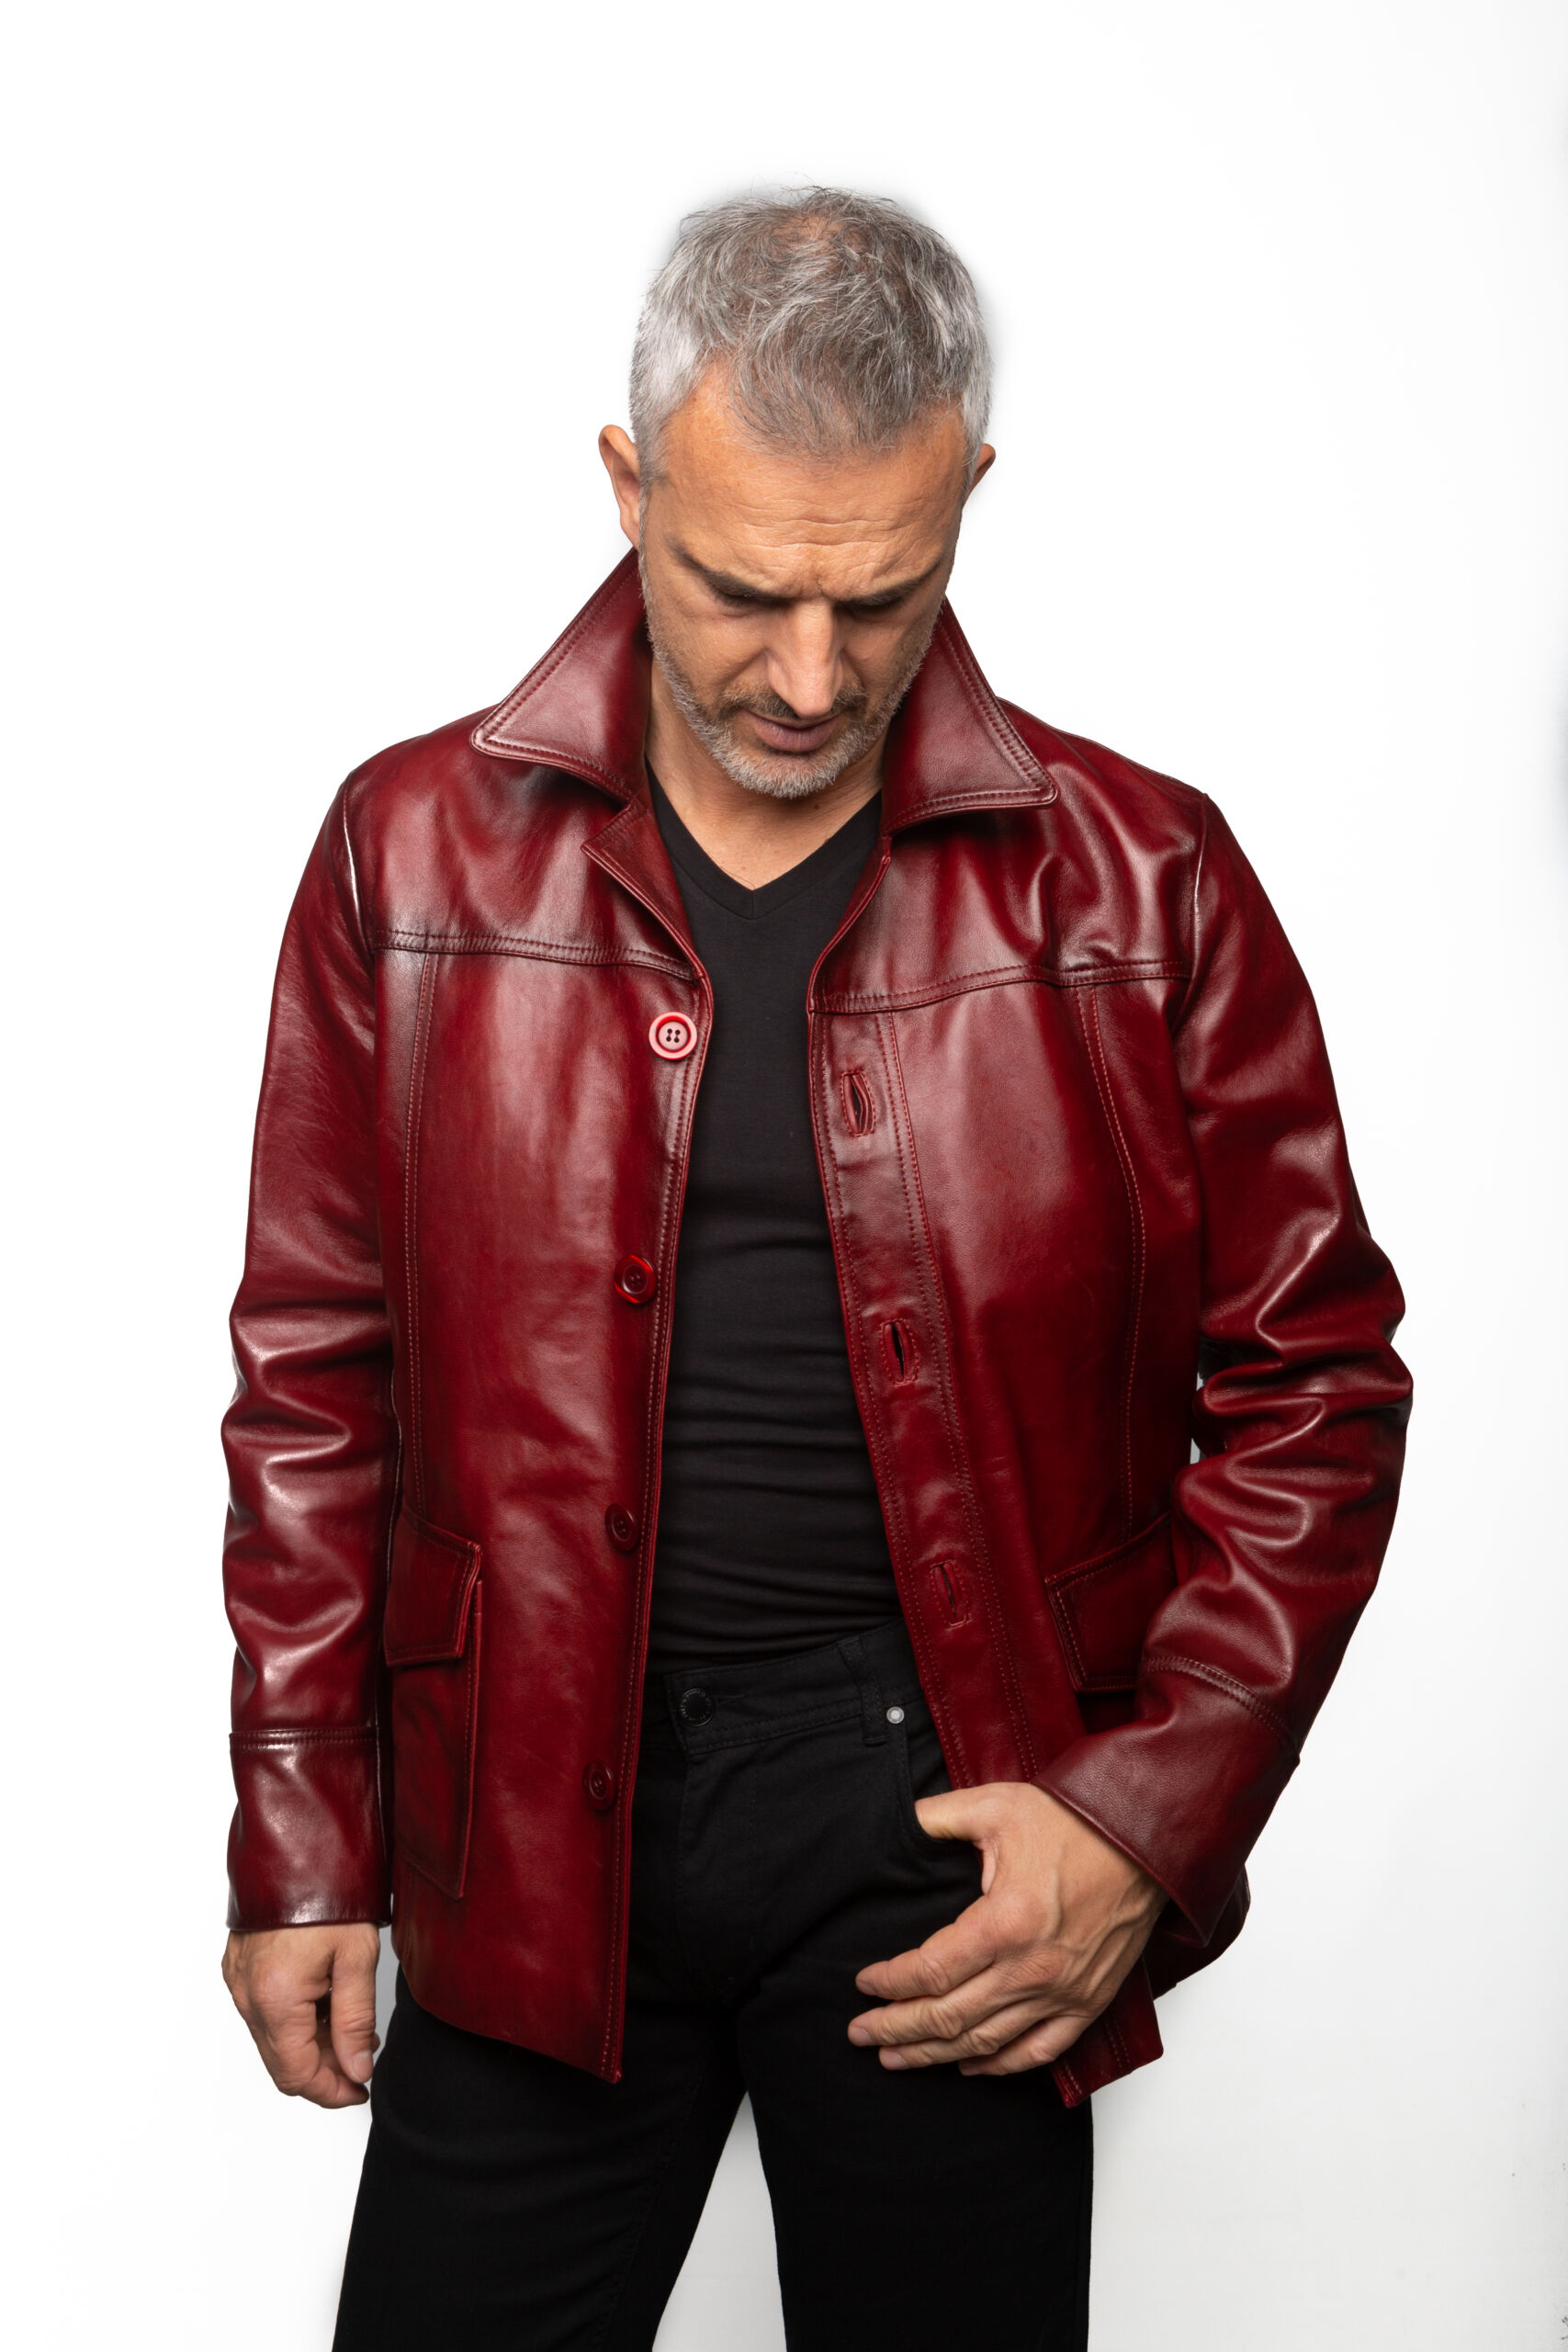 Shop Mens Red Leather Jackets at Discounted Price - WearOstrich.com